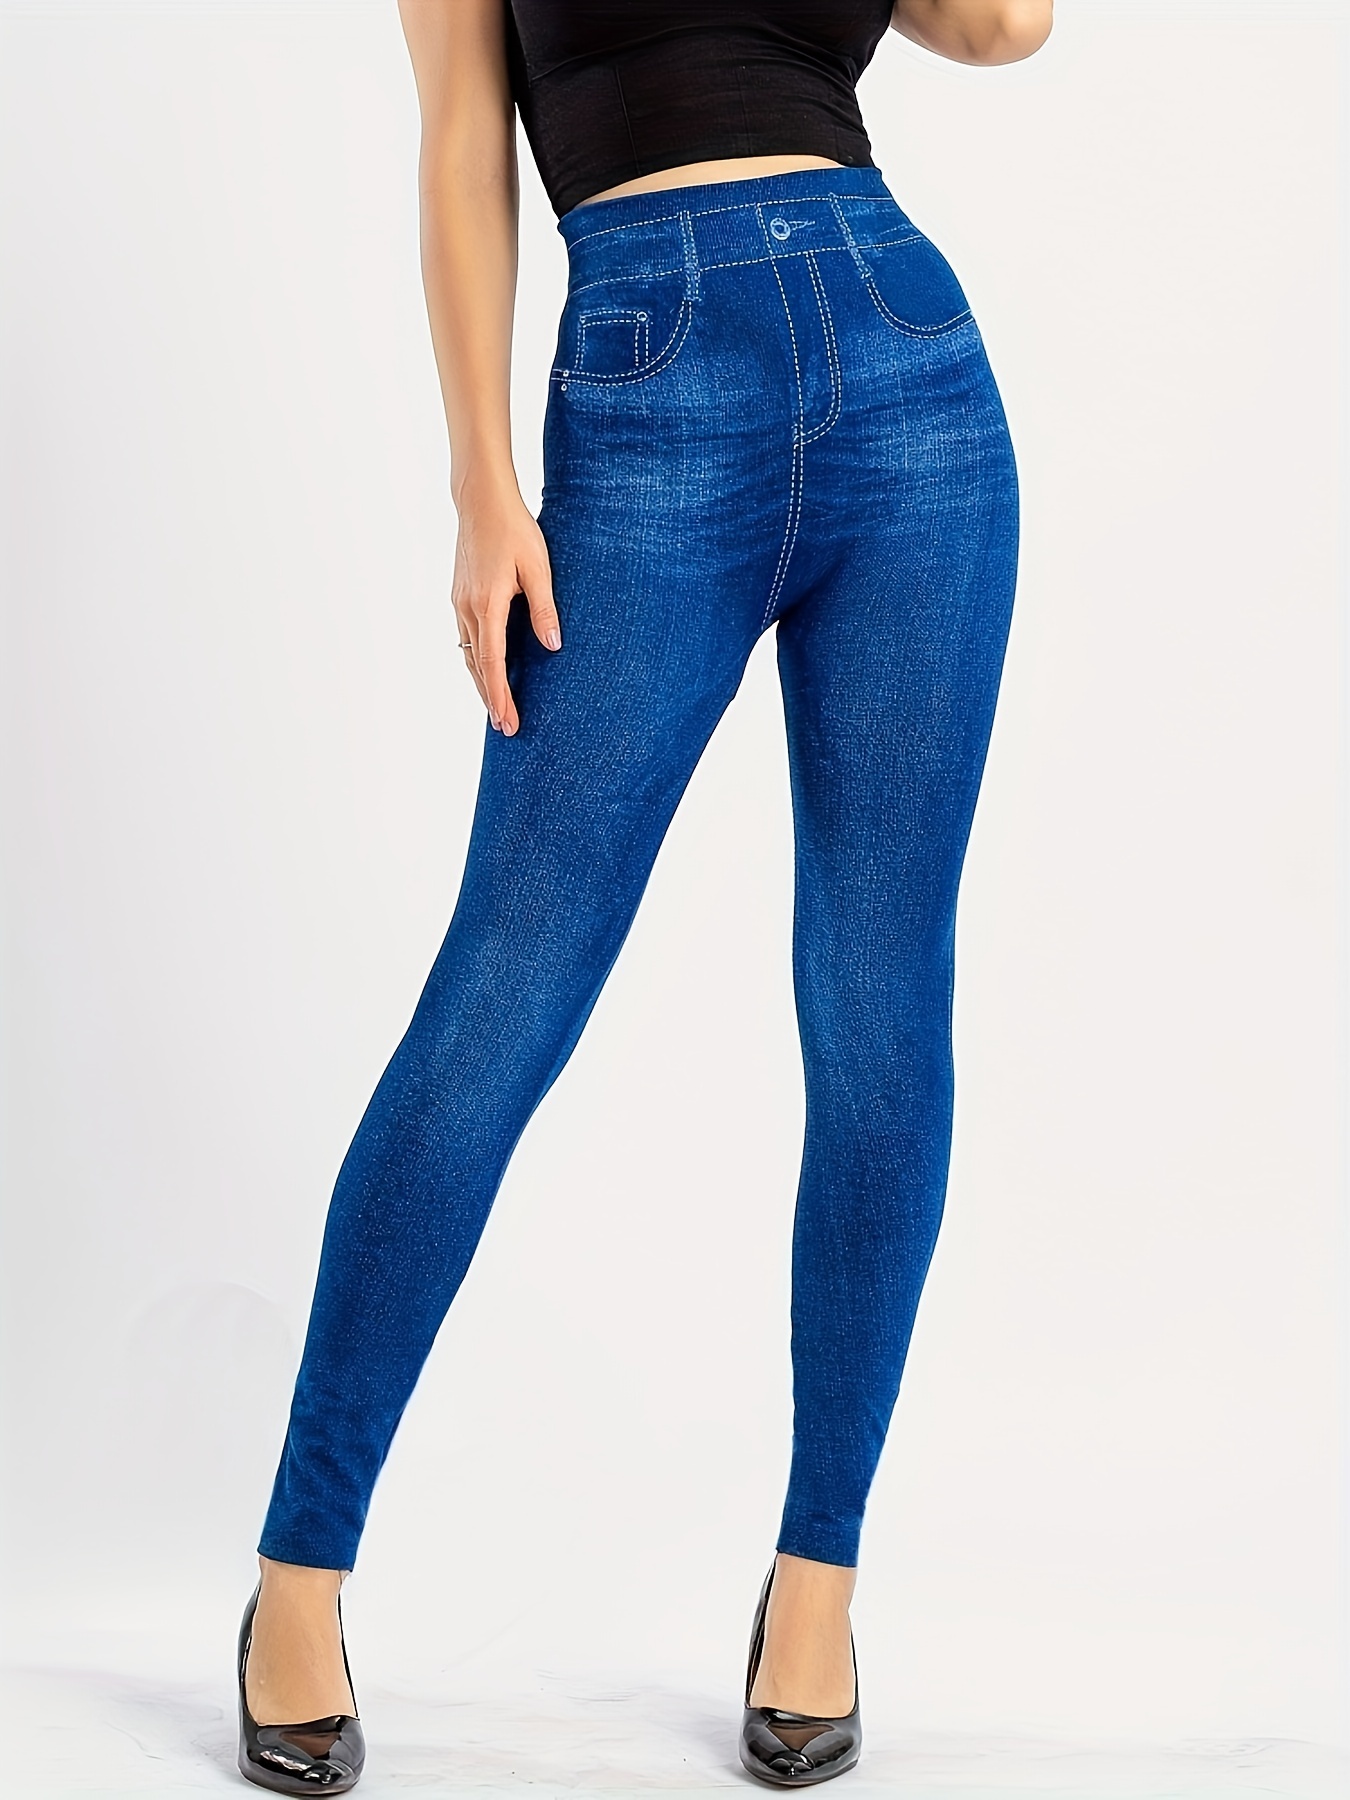 Lightning Deals of Today Clearance Women's Jeggings Denim Print Fake Jeans  Look Like Leggings Sexy Stretchy High Waist Slim Skinny Jeggings at   Women's Clothing store